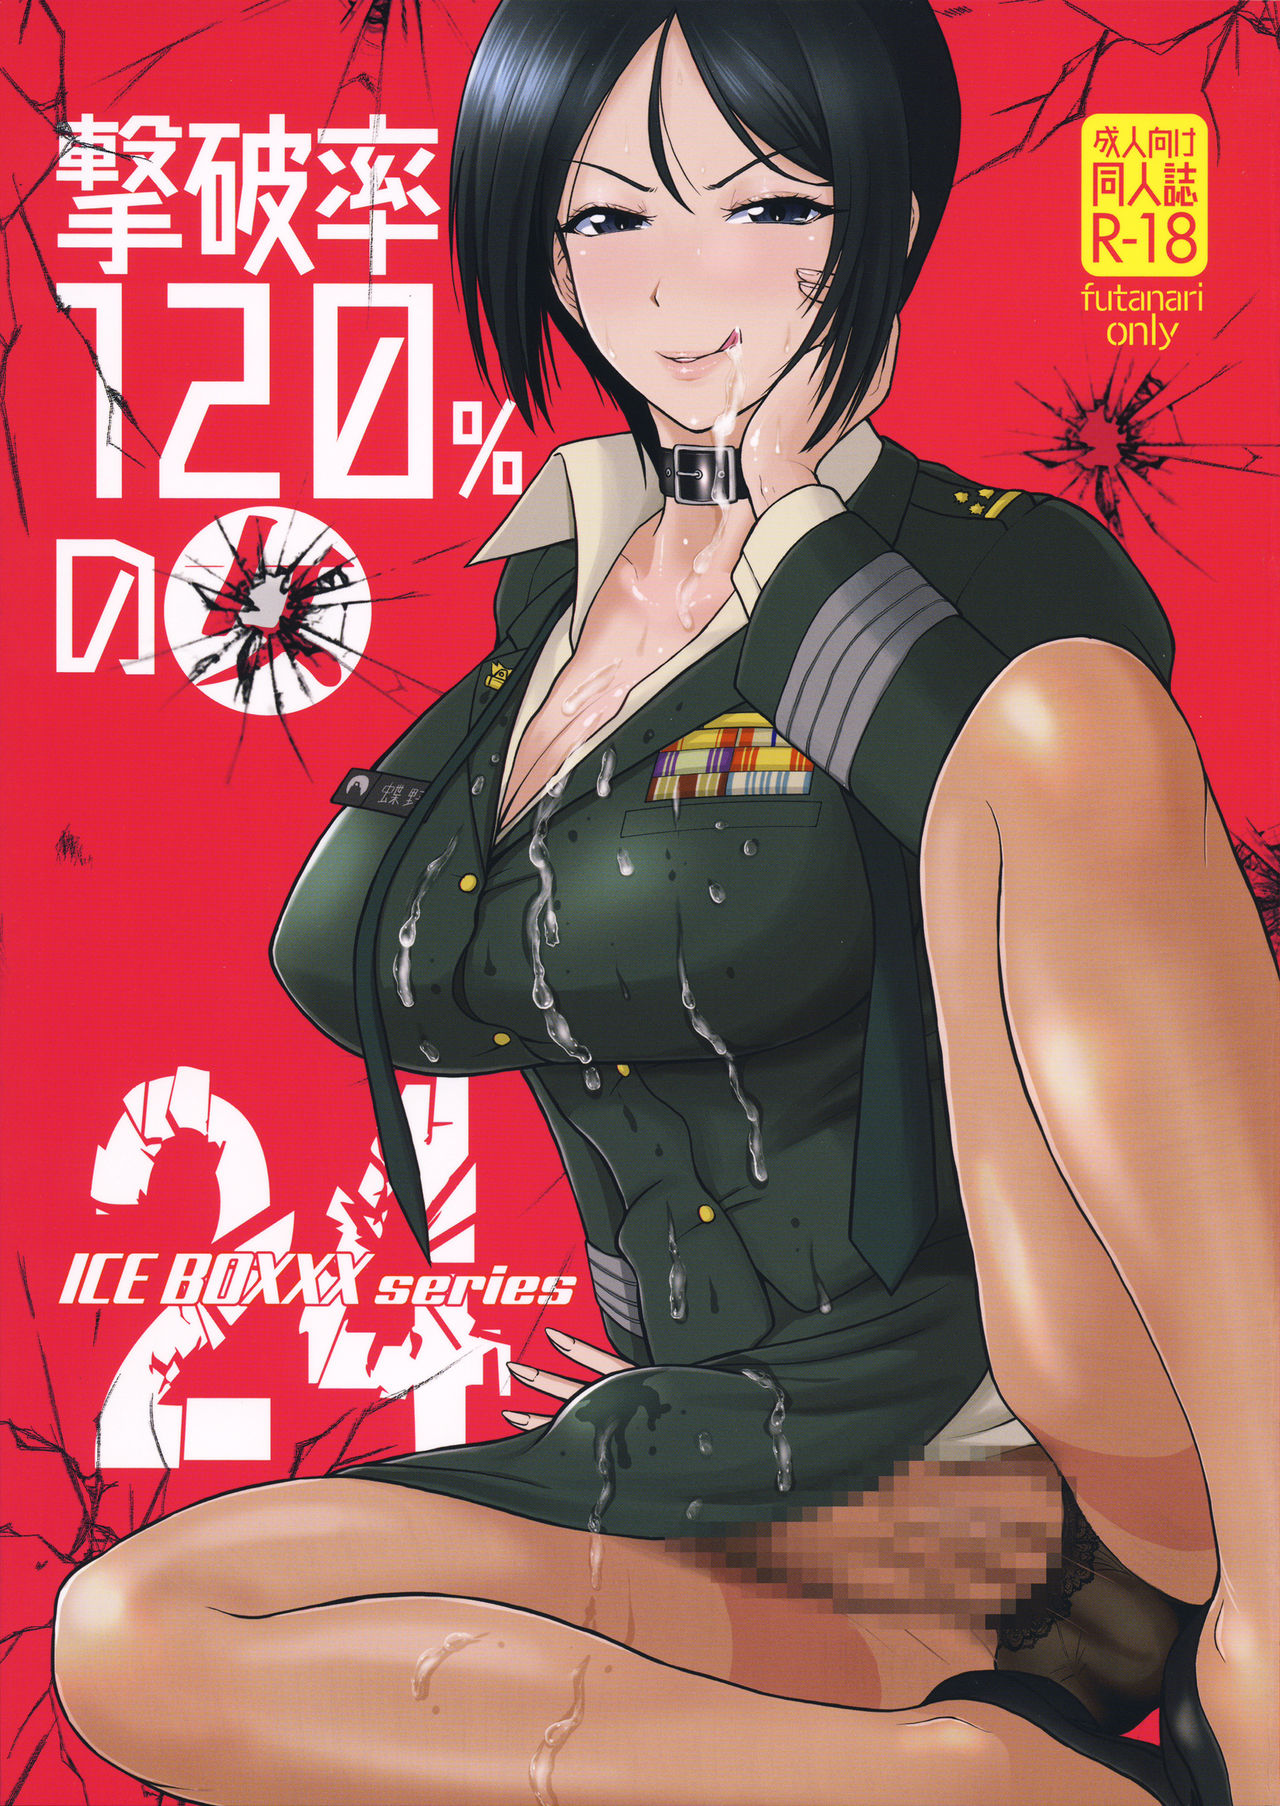 (CT33) [SERIOUS GRAPHICS (ICE)] ICE BOXXX 24 (Girls und Panzer) [English] [Anomalous Raven] page 1 full